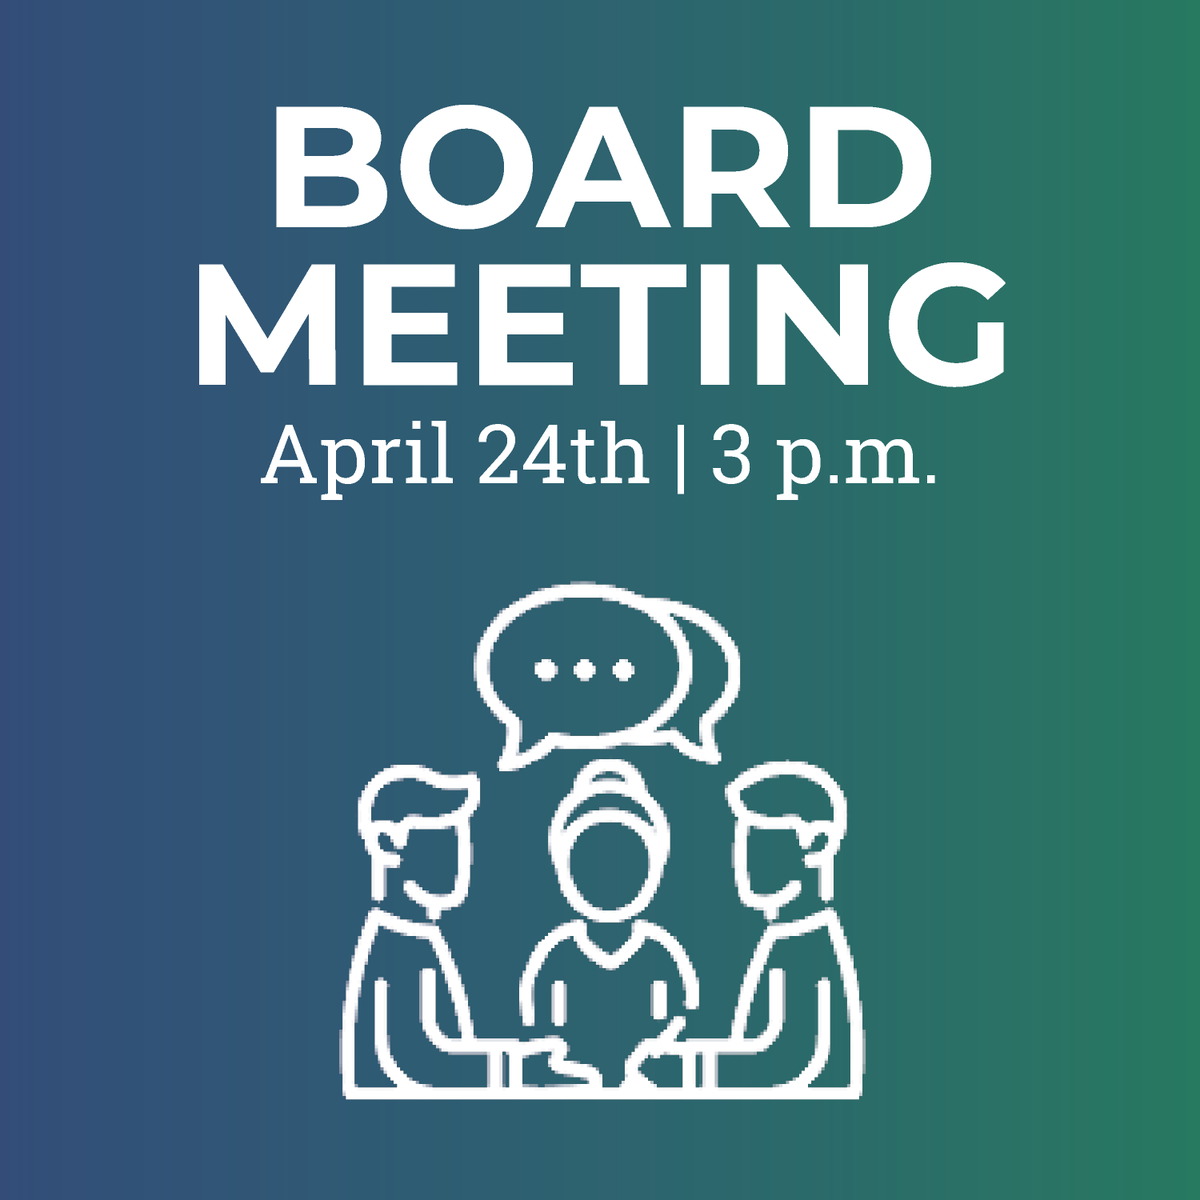 The Board of Election Commissioners of St. Louis County will hold a board meeting on Wed., April 24 at 3pm. The public is encouraged to attend this meeting, and those who wish to speak can complete a speaker request card which is available beginning at 2:45 p.m. on April 24.